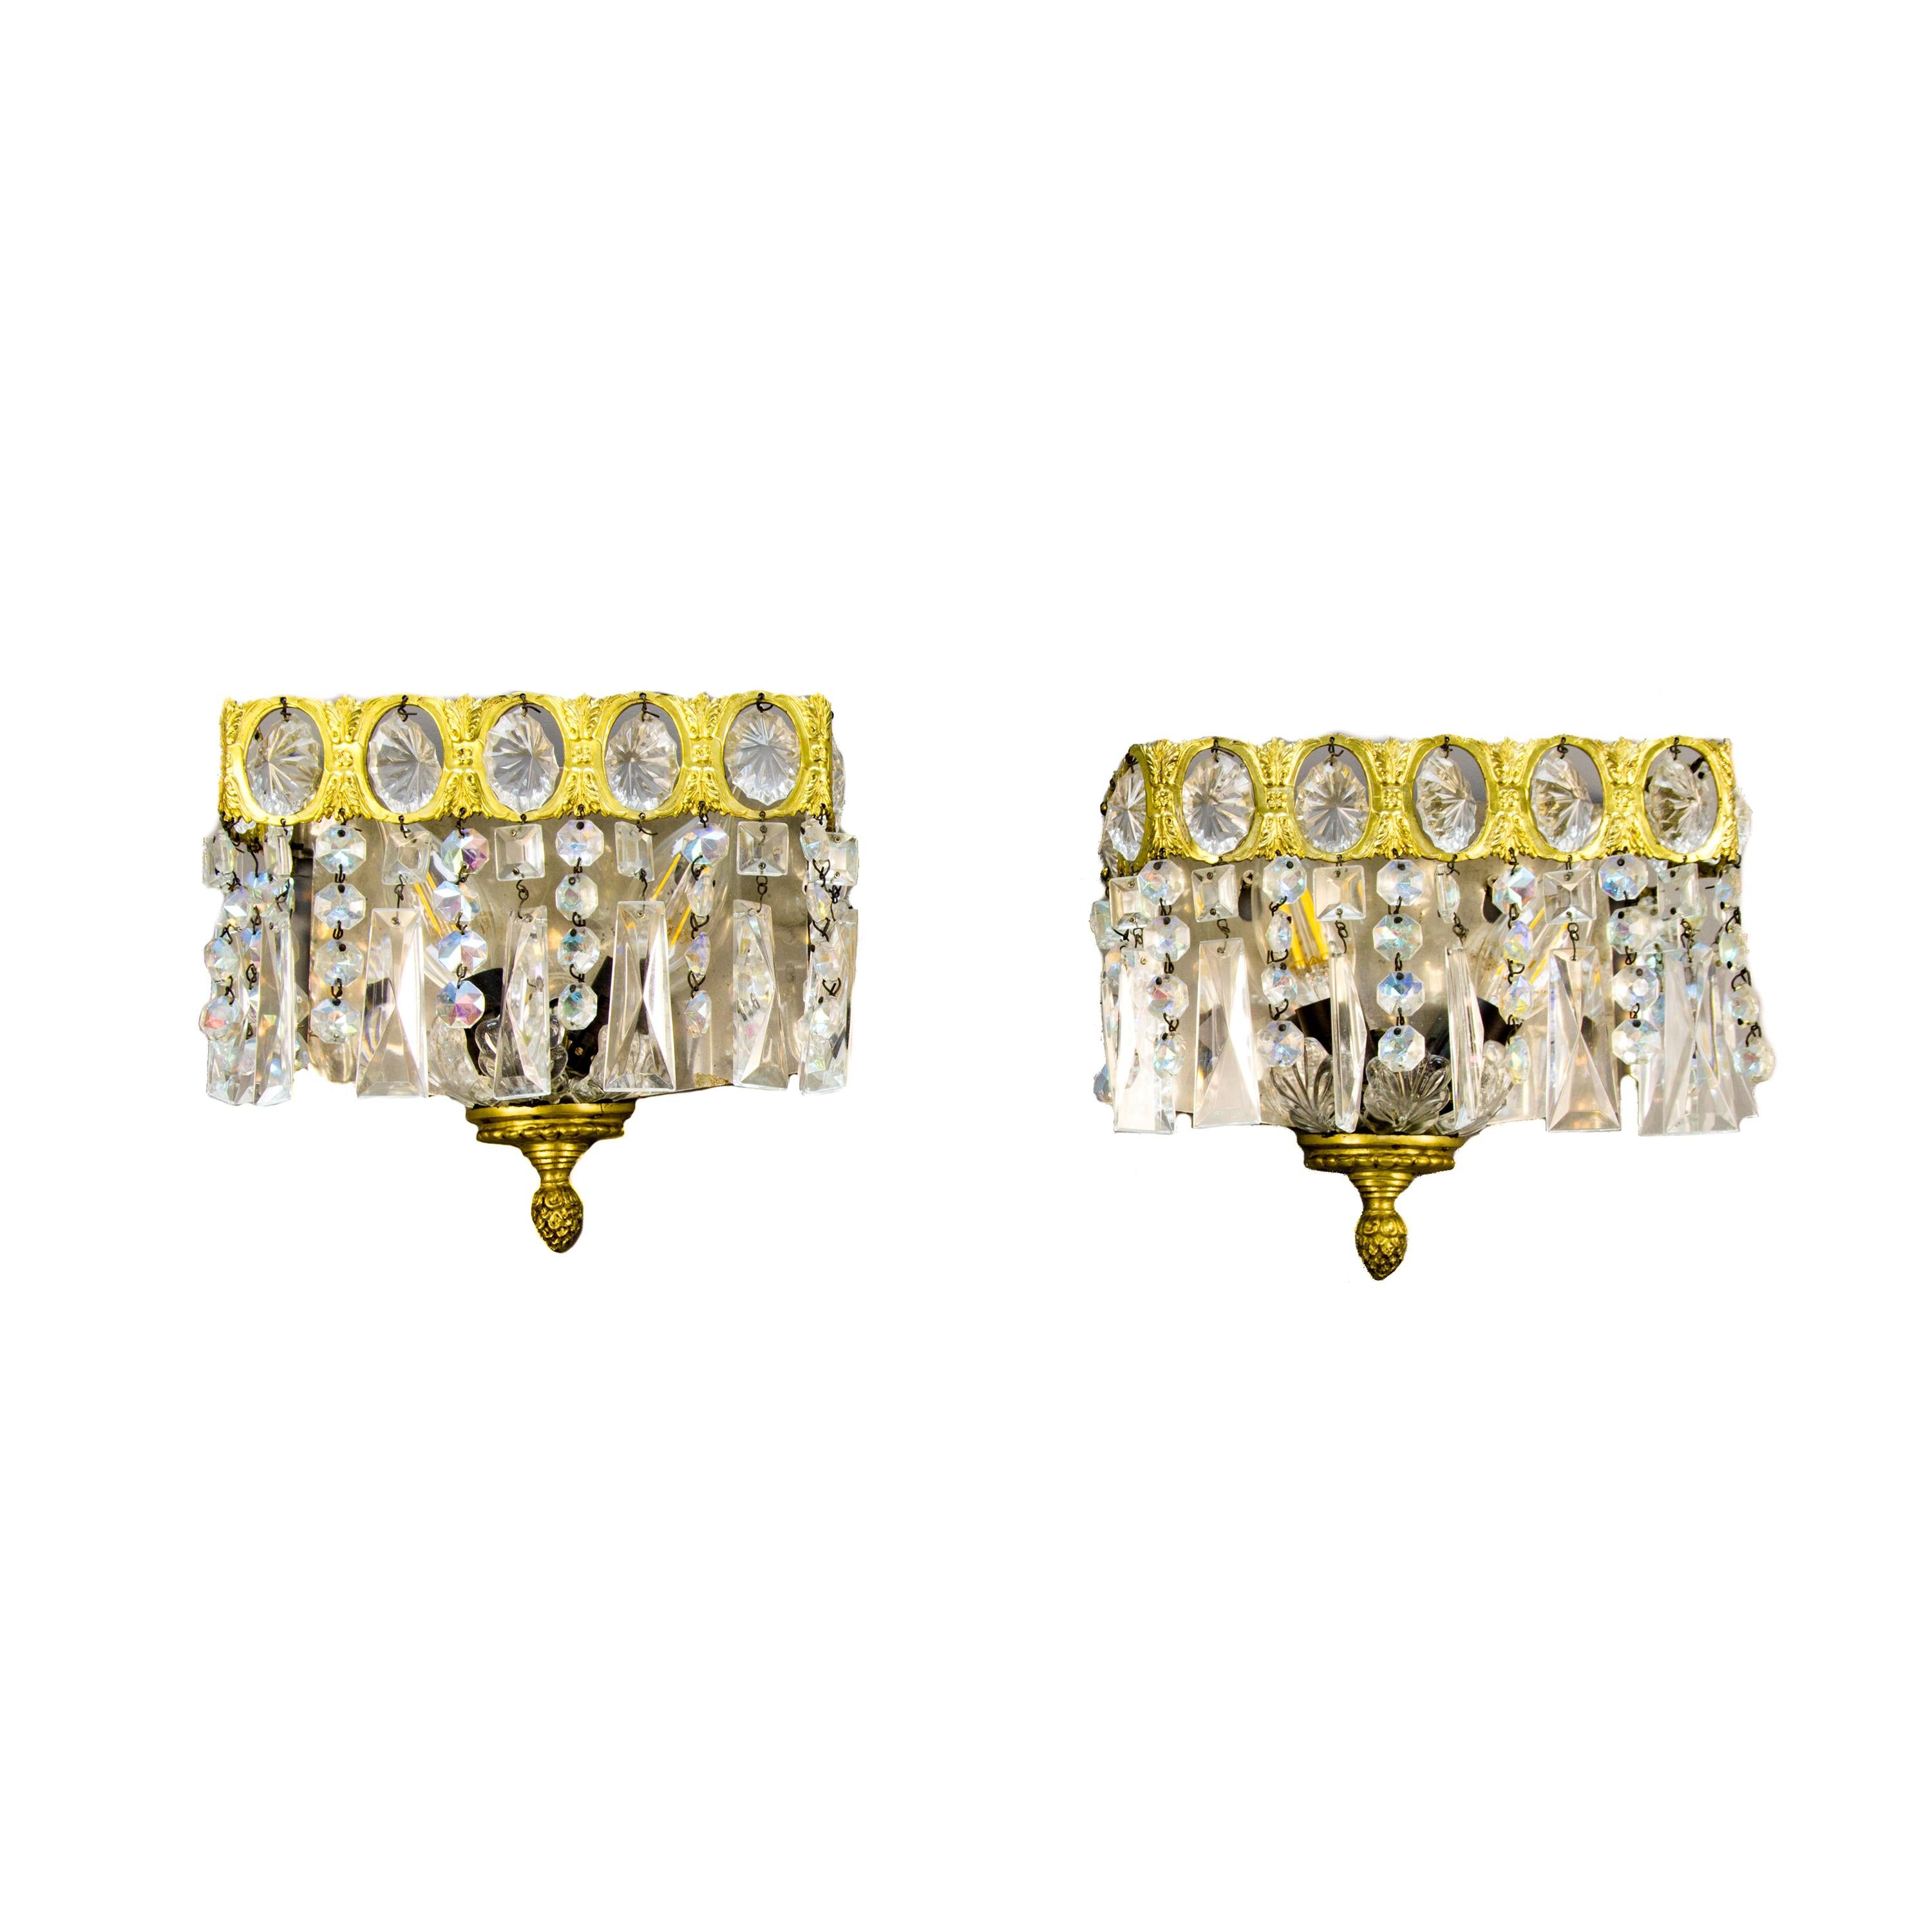 Pair of Italian Vintage Crystal Glass and Brass Sconces For Sale